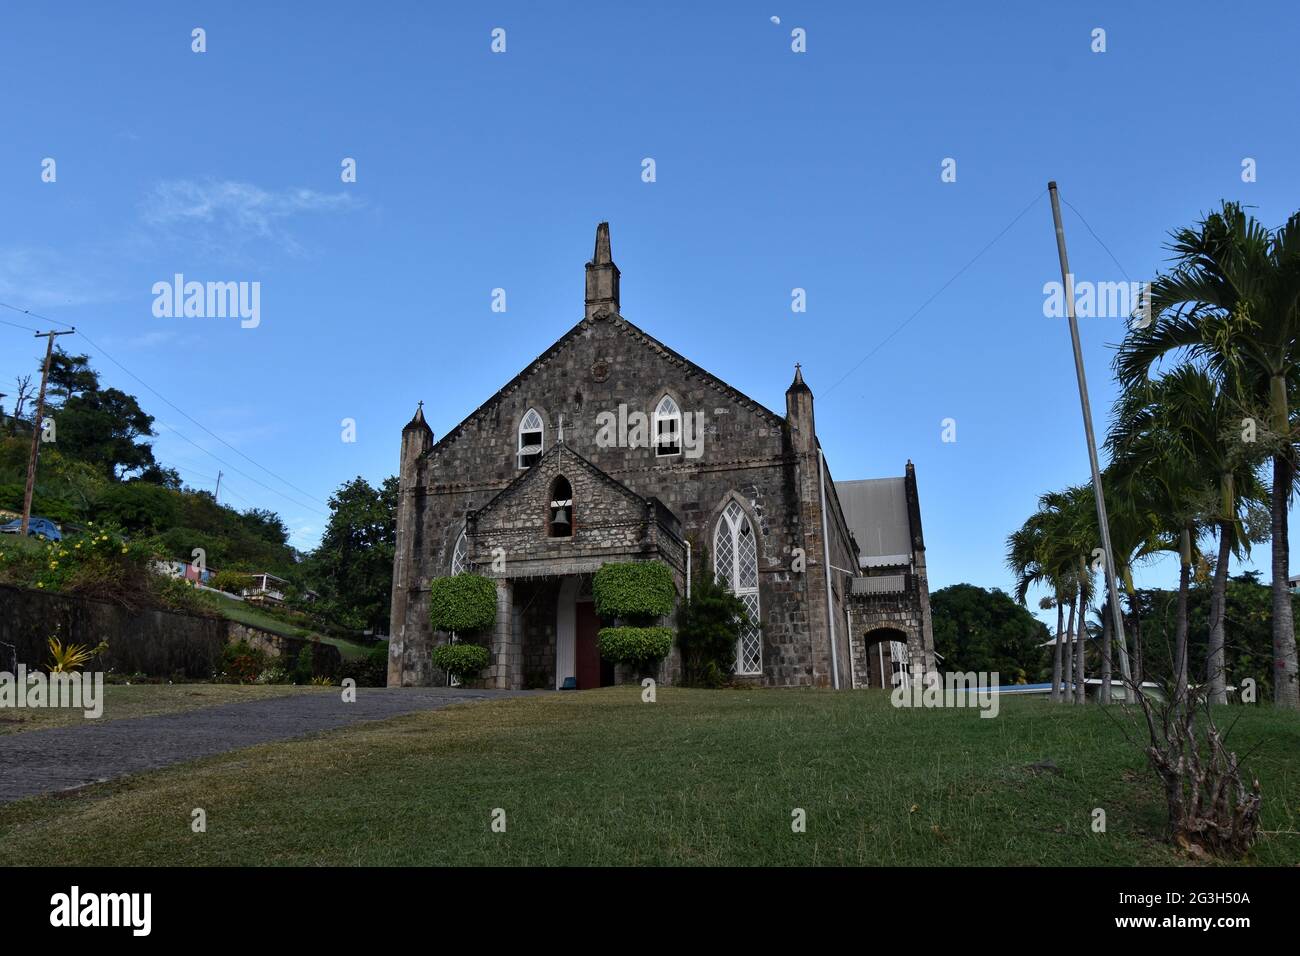 Calliaqua, St. Vincent and the Grenadines- January 4th, 2020: The Saint Paul Anglican Church. Stock Photo